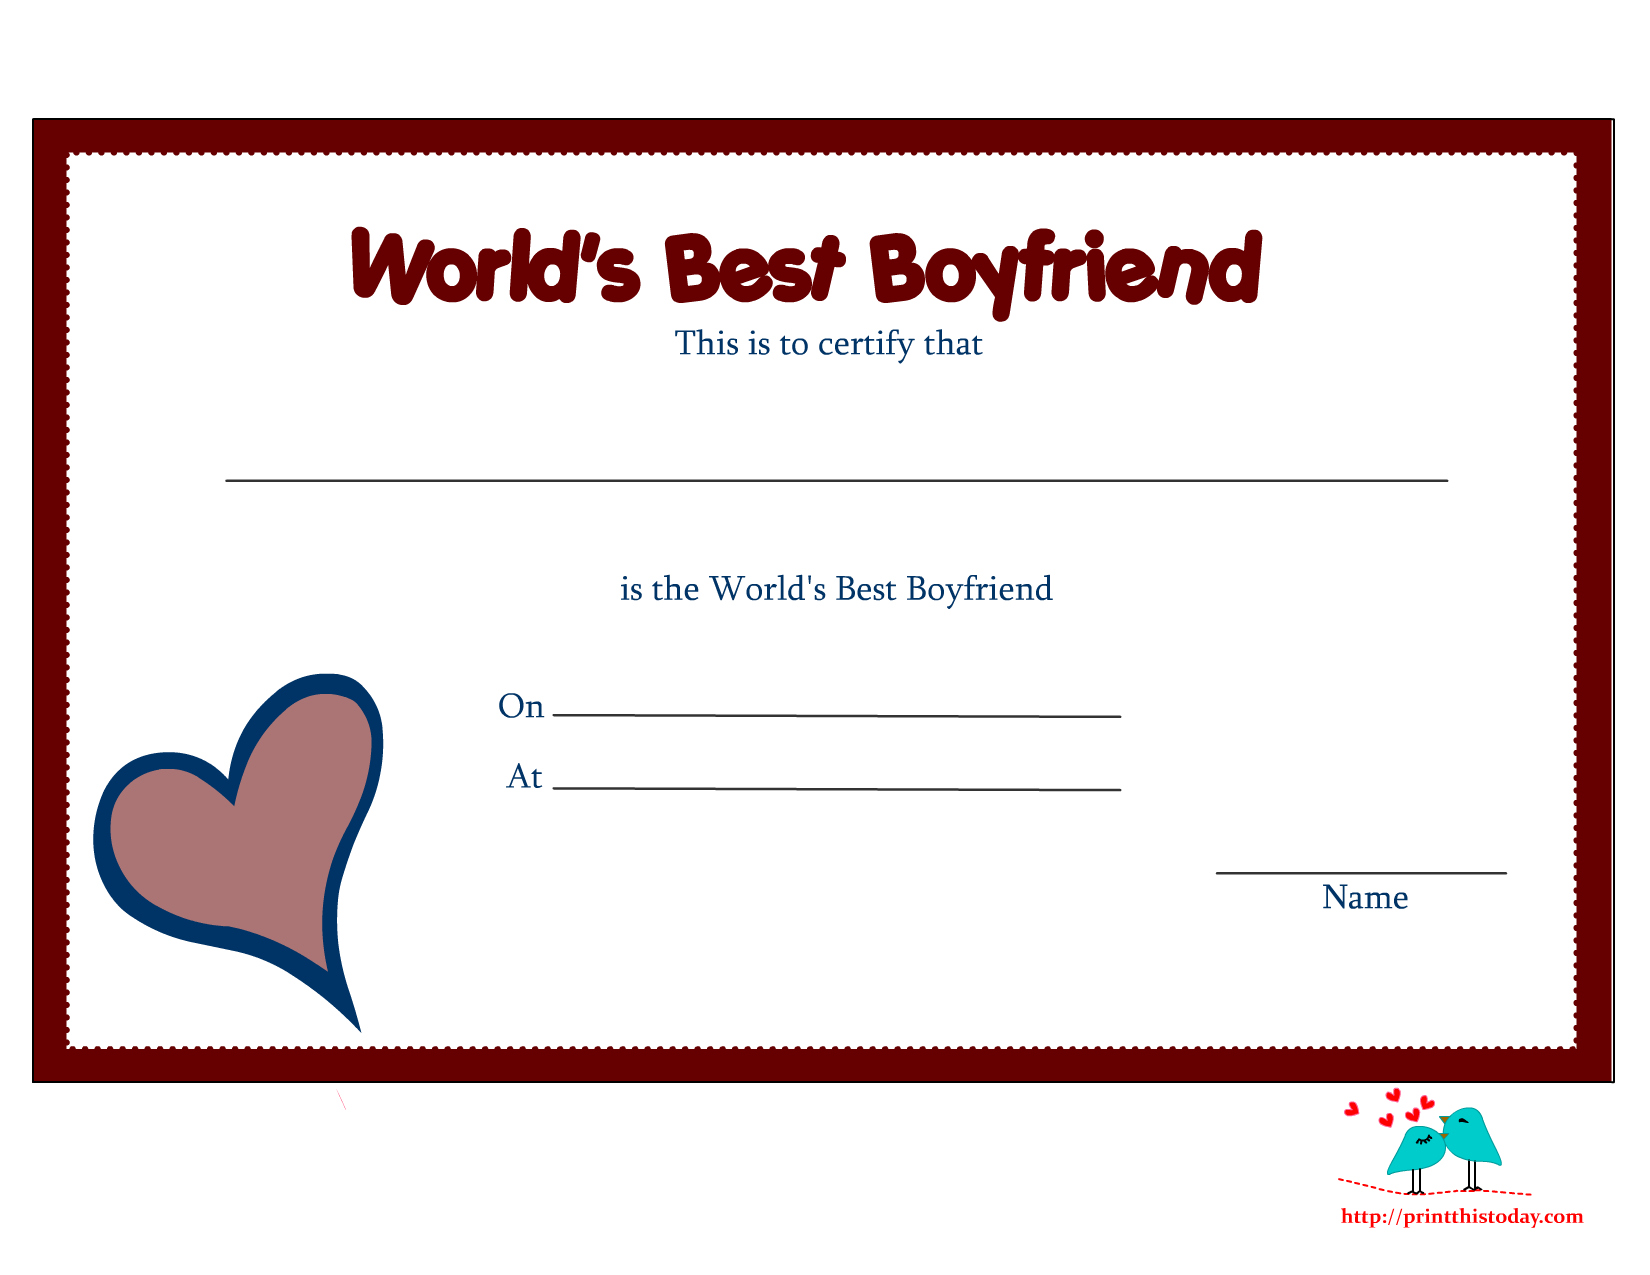 good clipart recognition certificate